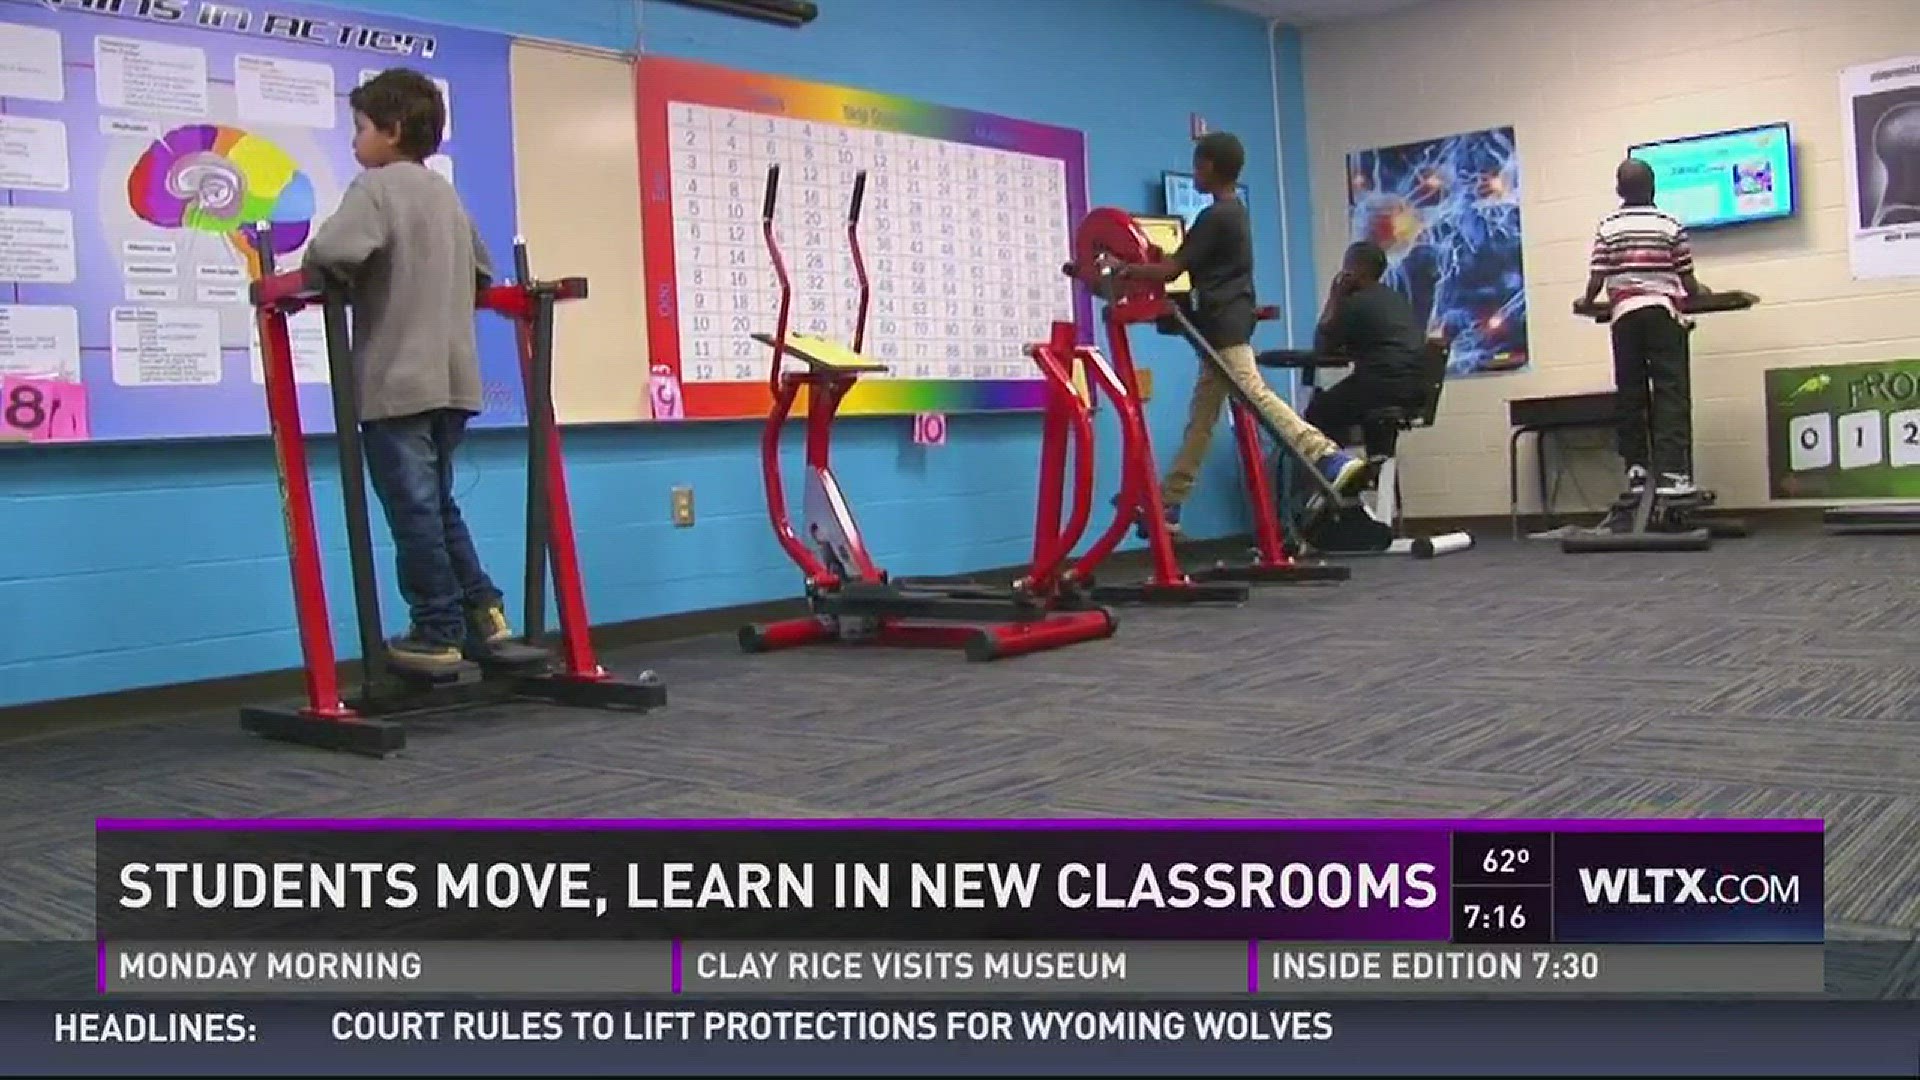 Students move in classroom complete with bike desks.